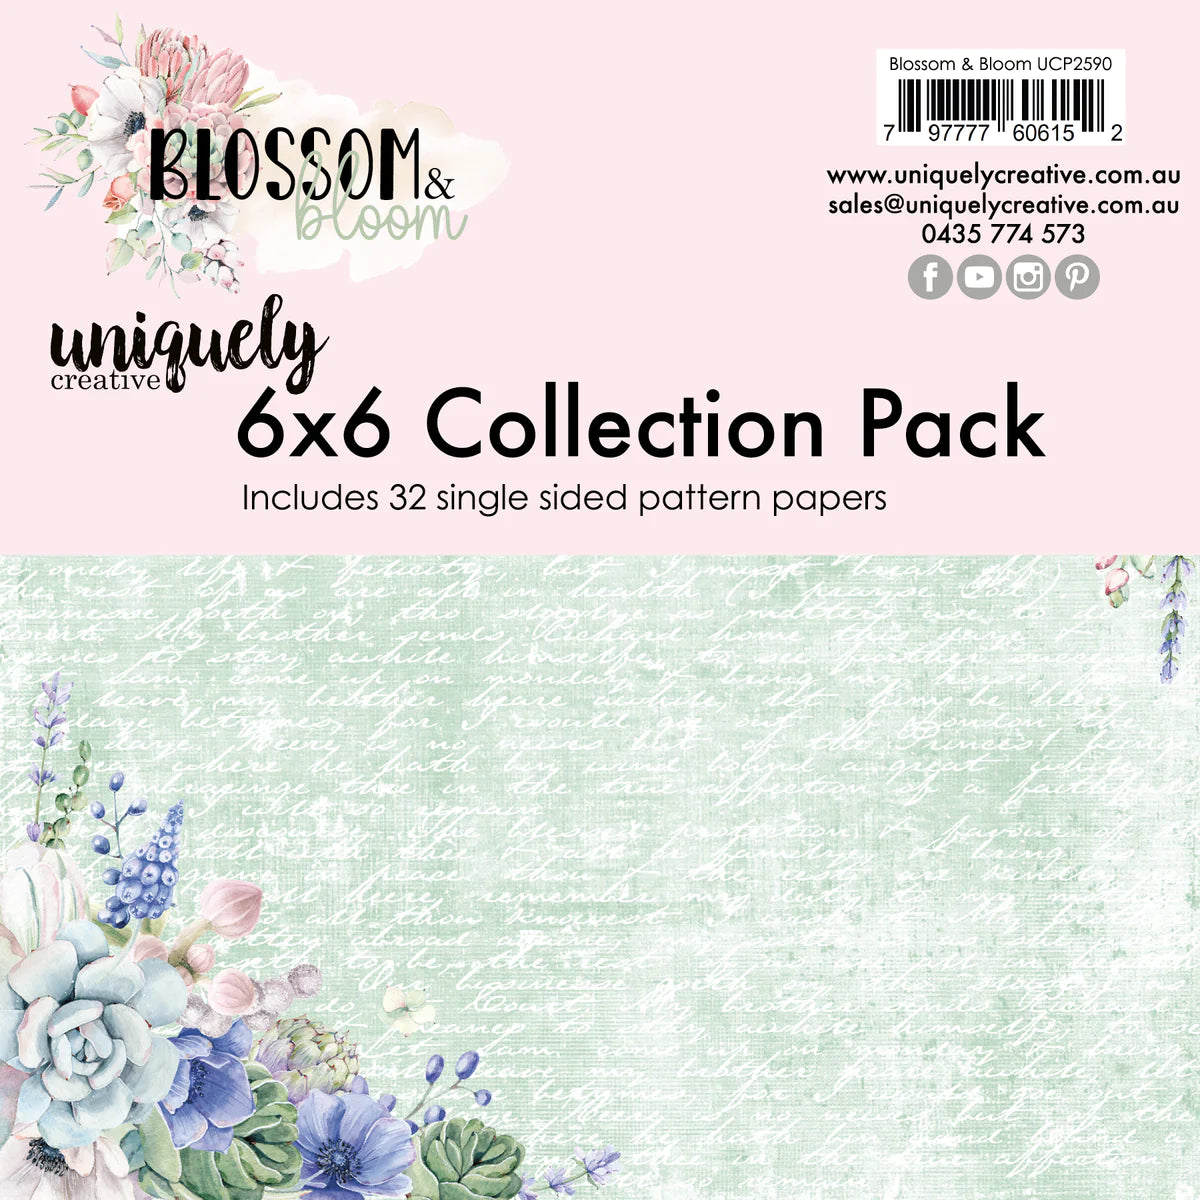 Uniquely Creative - 6x6 Collection Pack - Blossom & Bloom